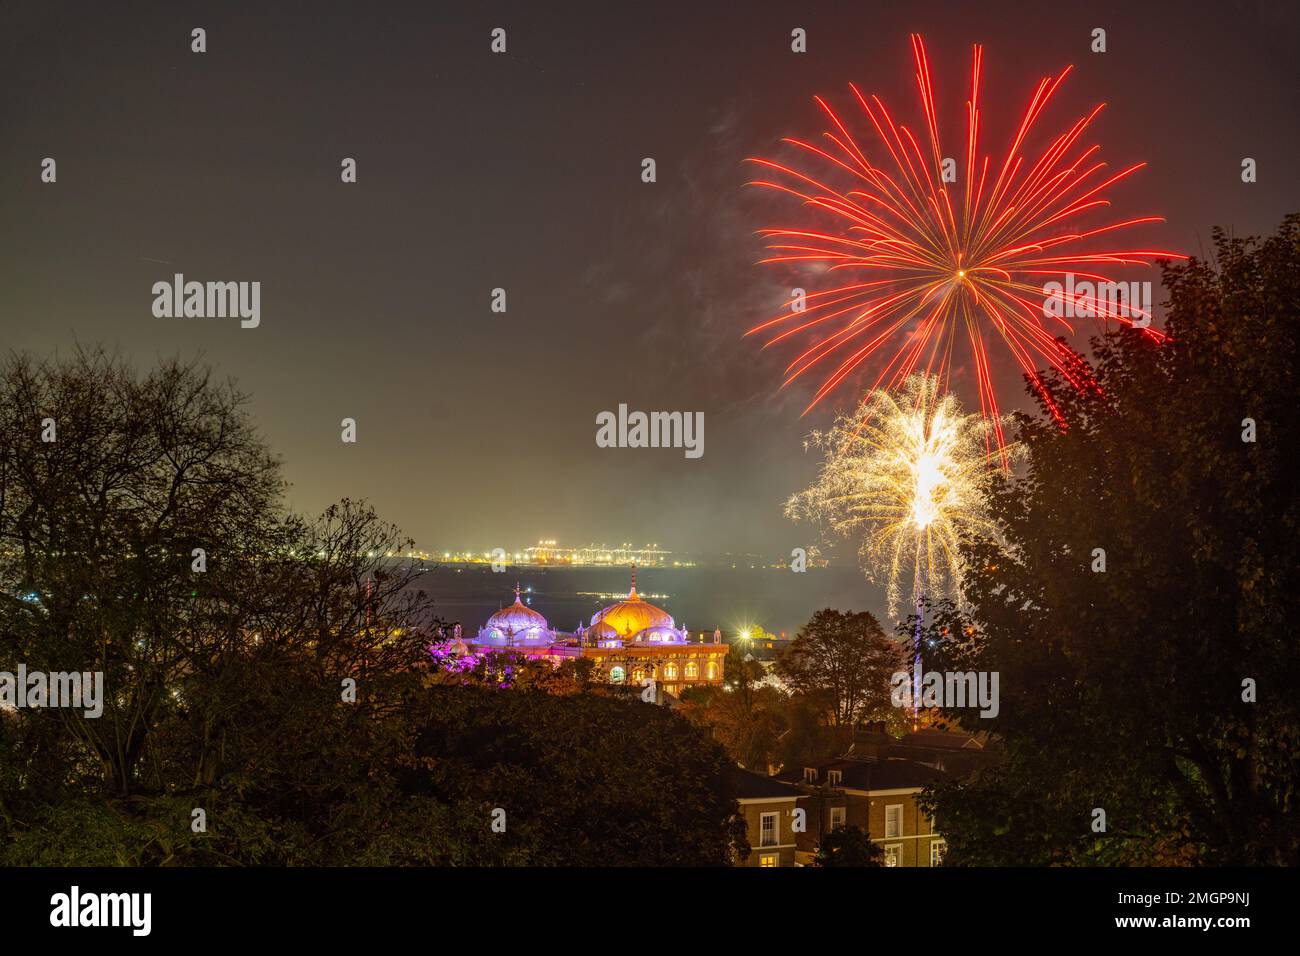 Gravesend fire works from Windmill Hill over the Sikh temple. Stock Photo